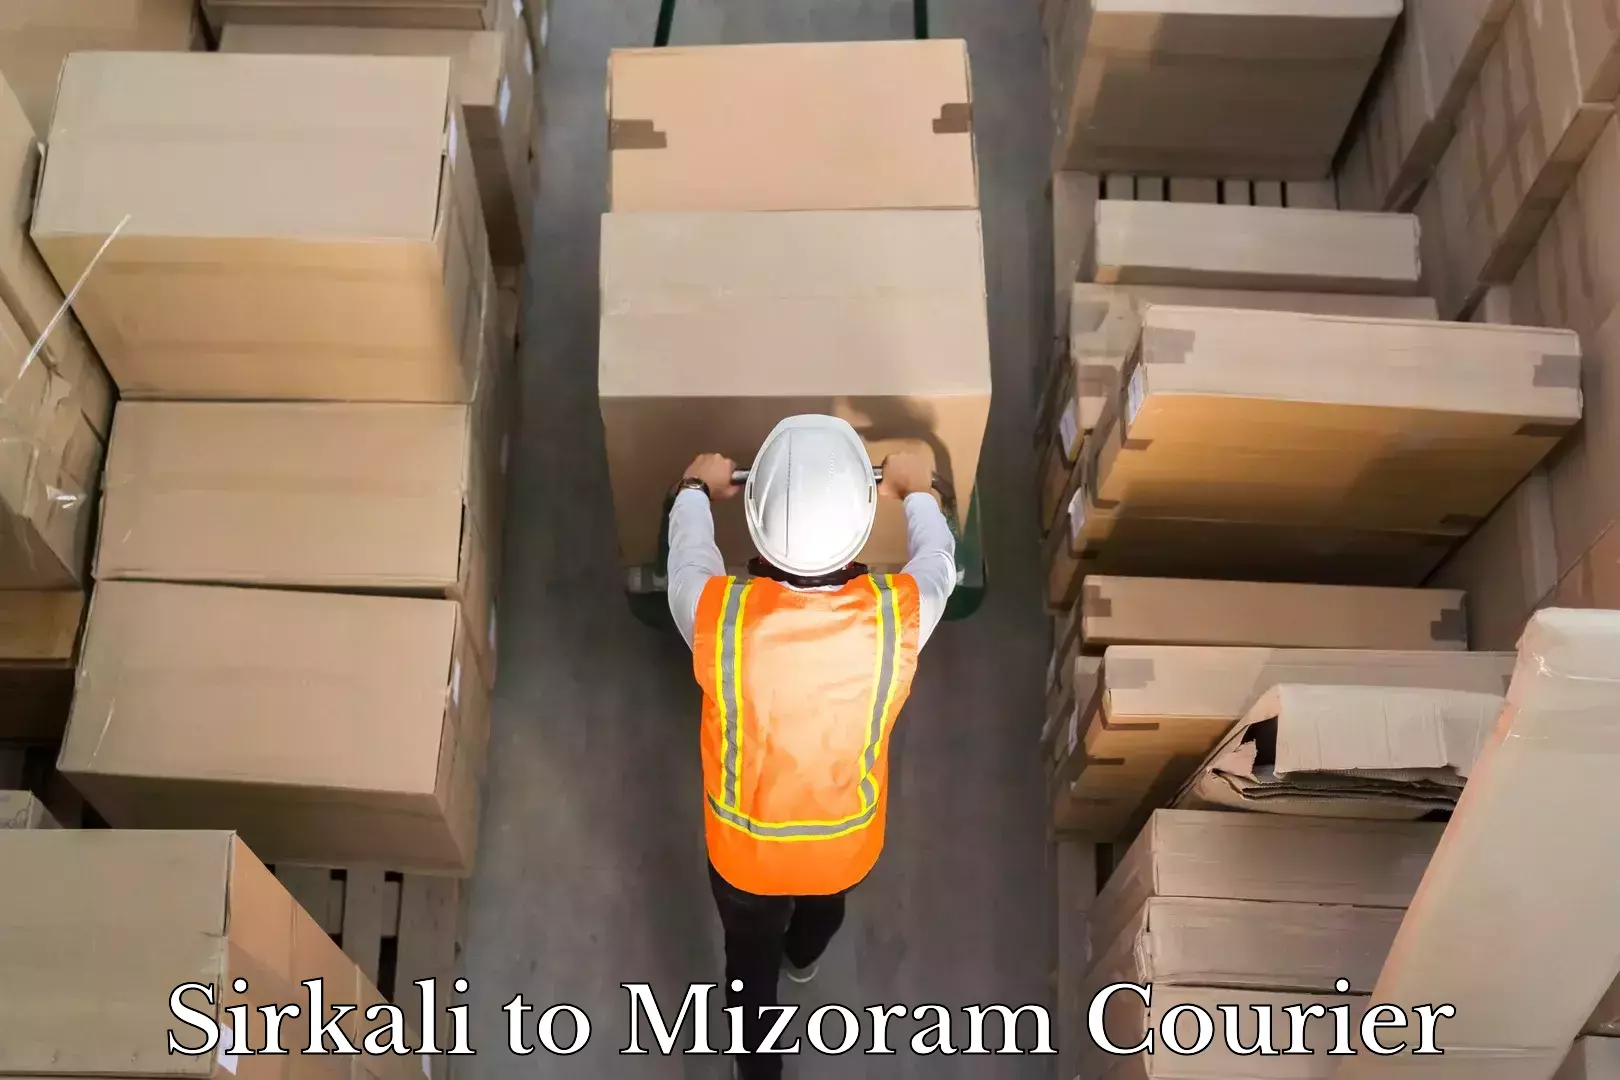 Modern delivery technologies in Sirkali to Mizoram